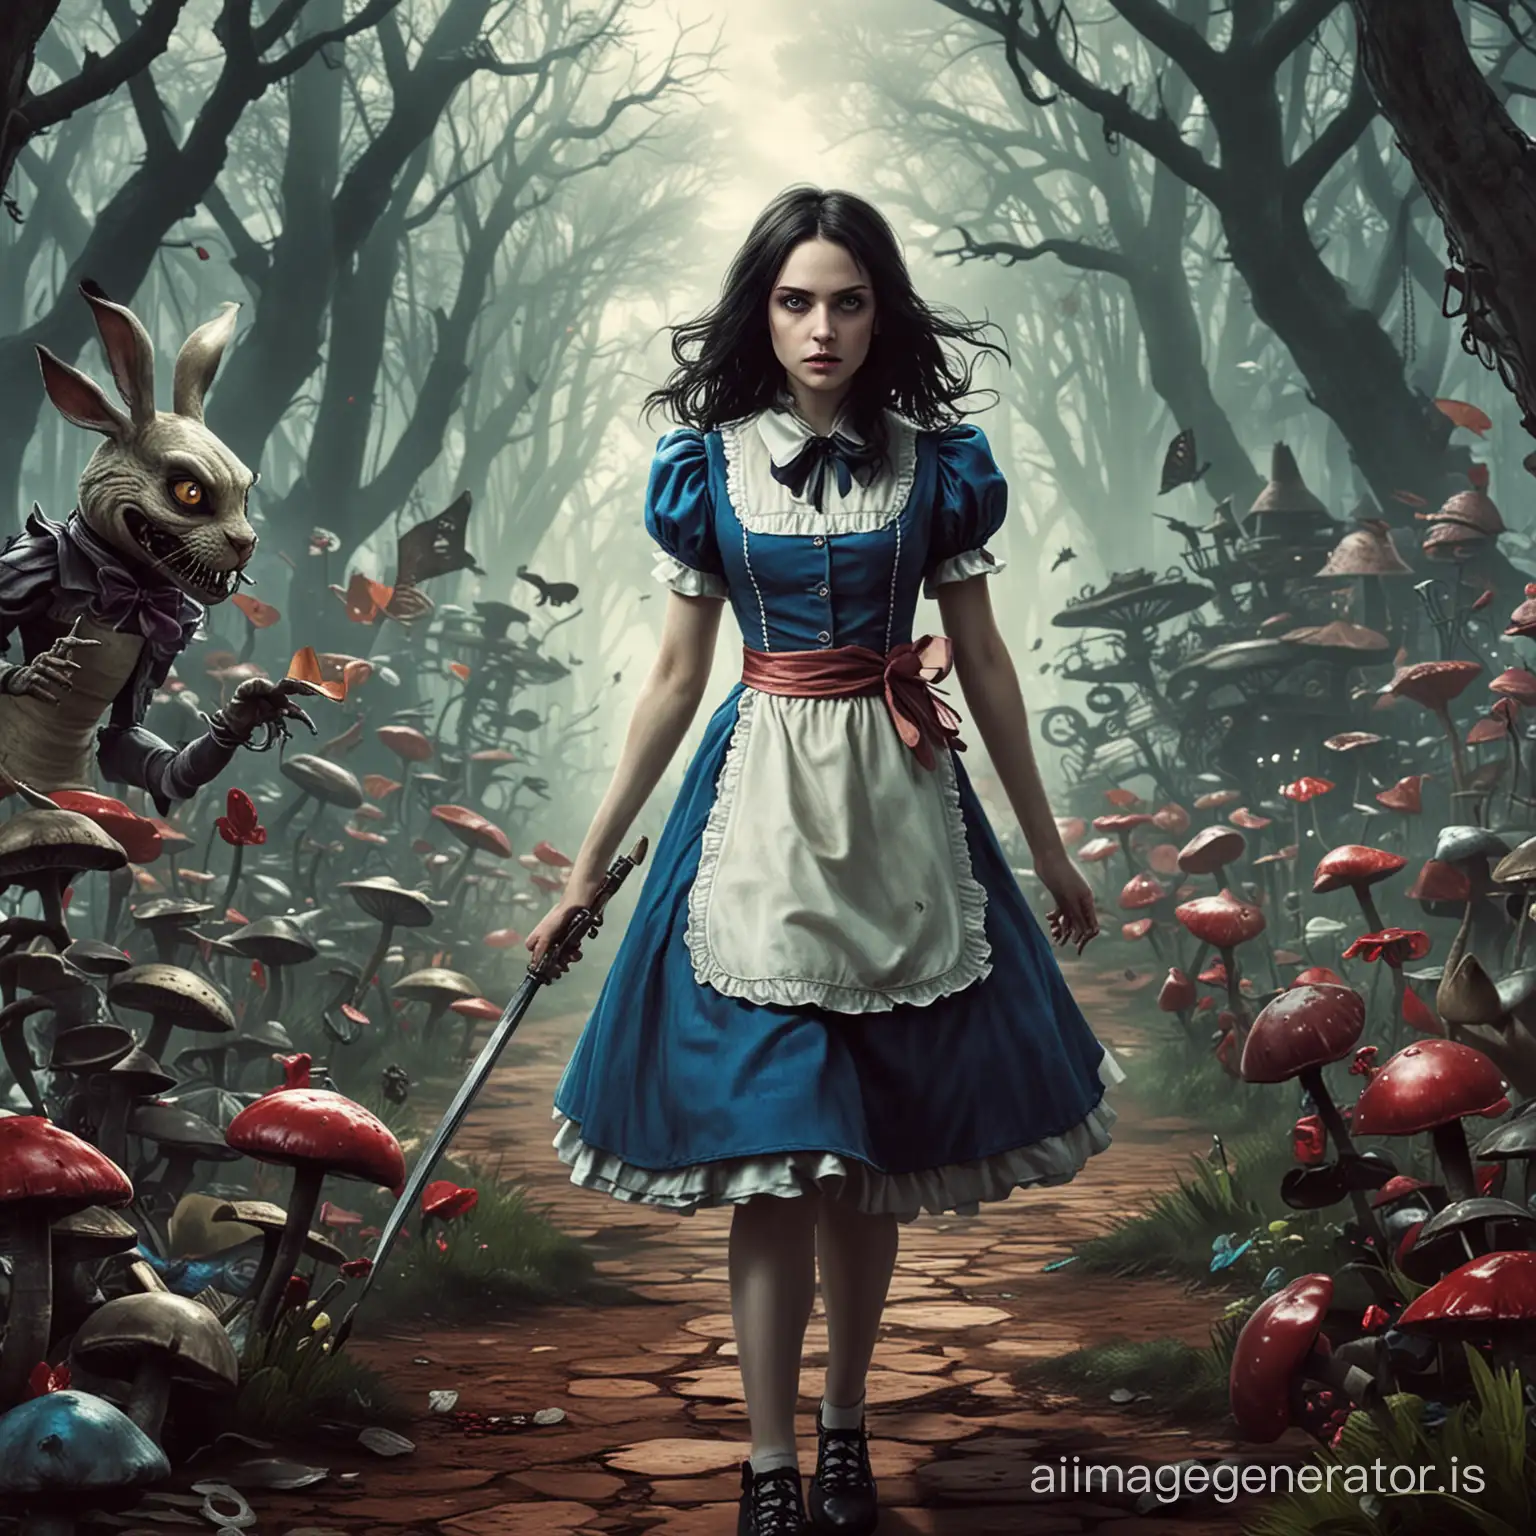 Alice-in-Wonderland-Madness-Returns-Art-Surreal-Fantasy-Portrait-of-Alice-Amidst-Chaos